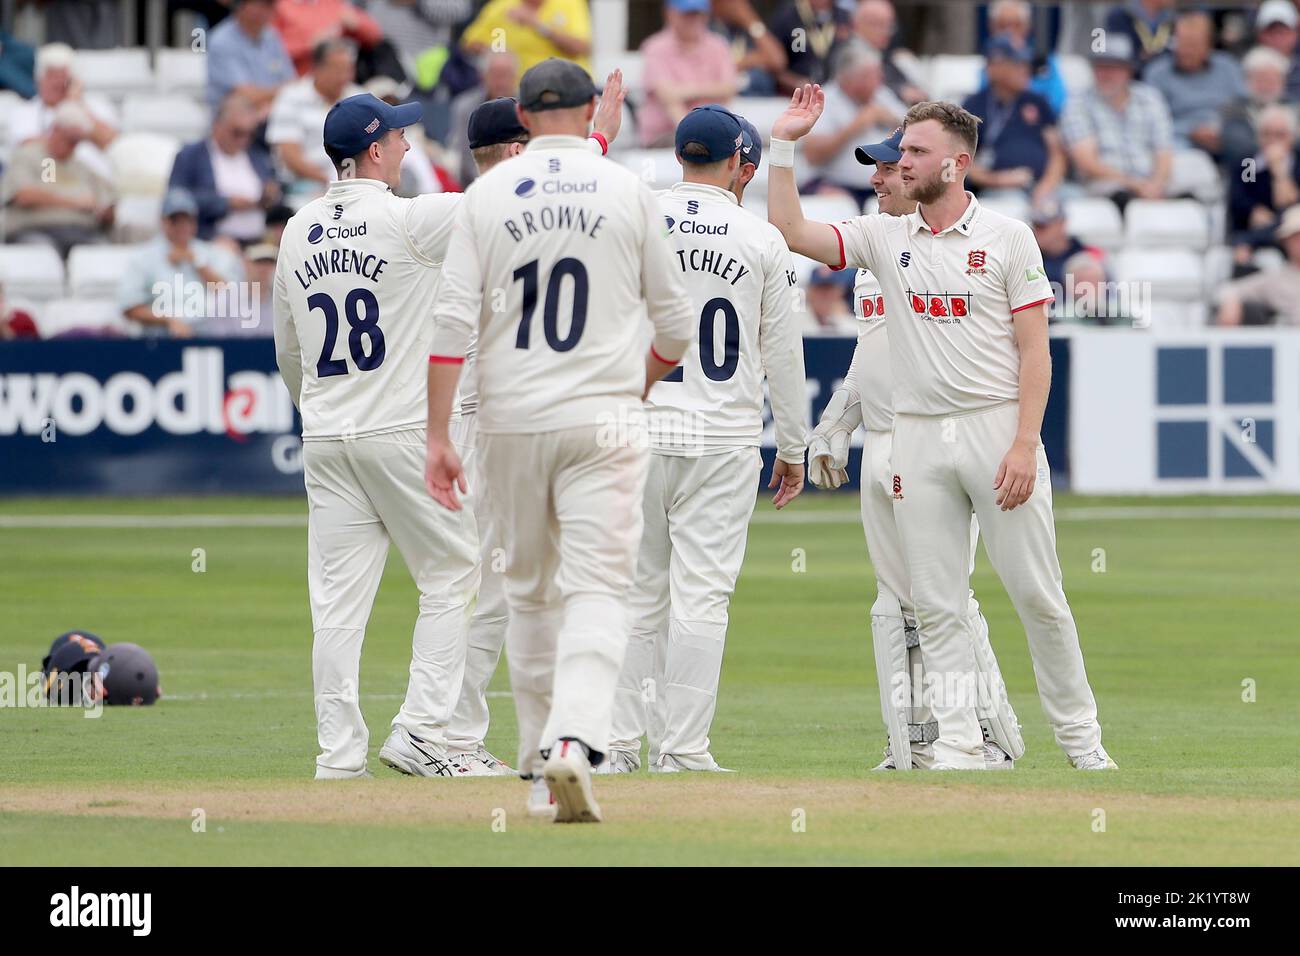 Sam Cook of Essex celebrates with his team mates after taking the wicket of Will Williams during Essex CCC vs Lancashire CCC, LV Insurance County Cham Stock Photo